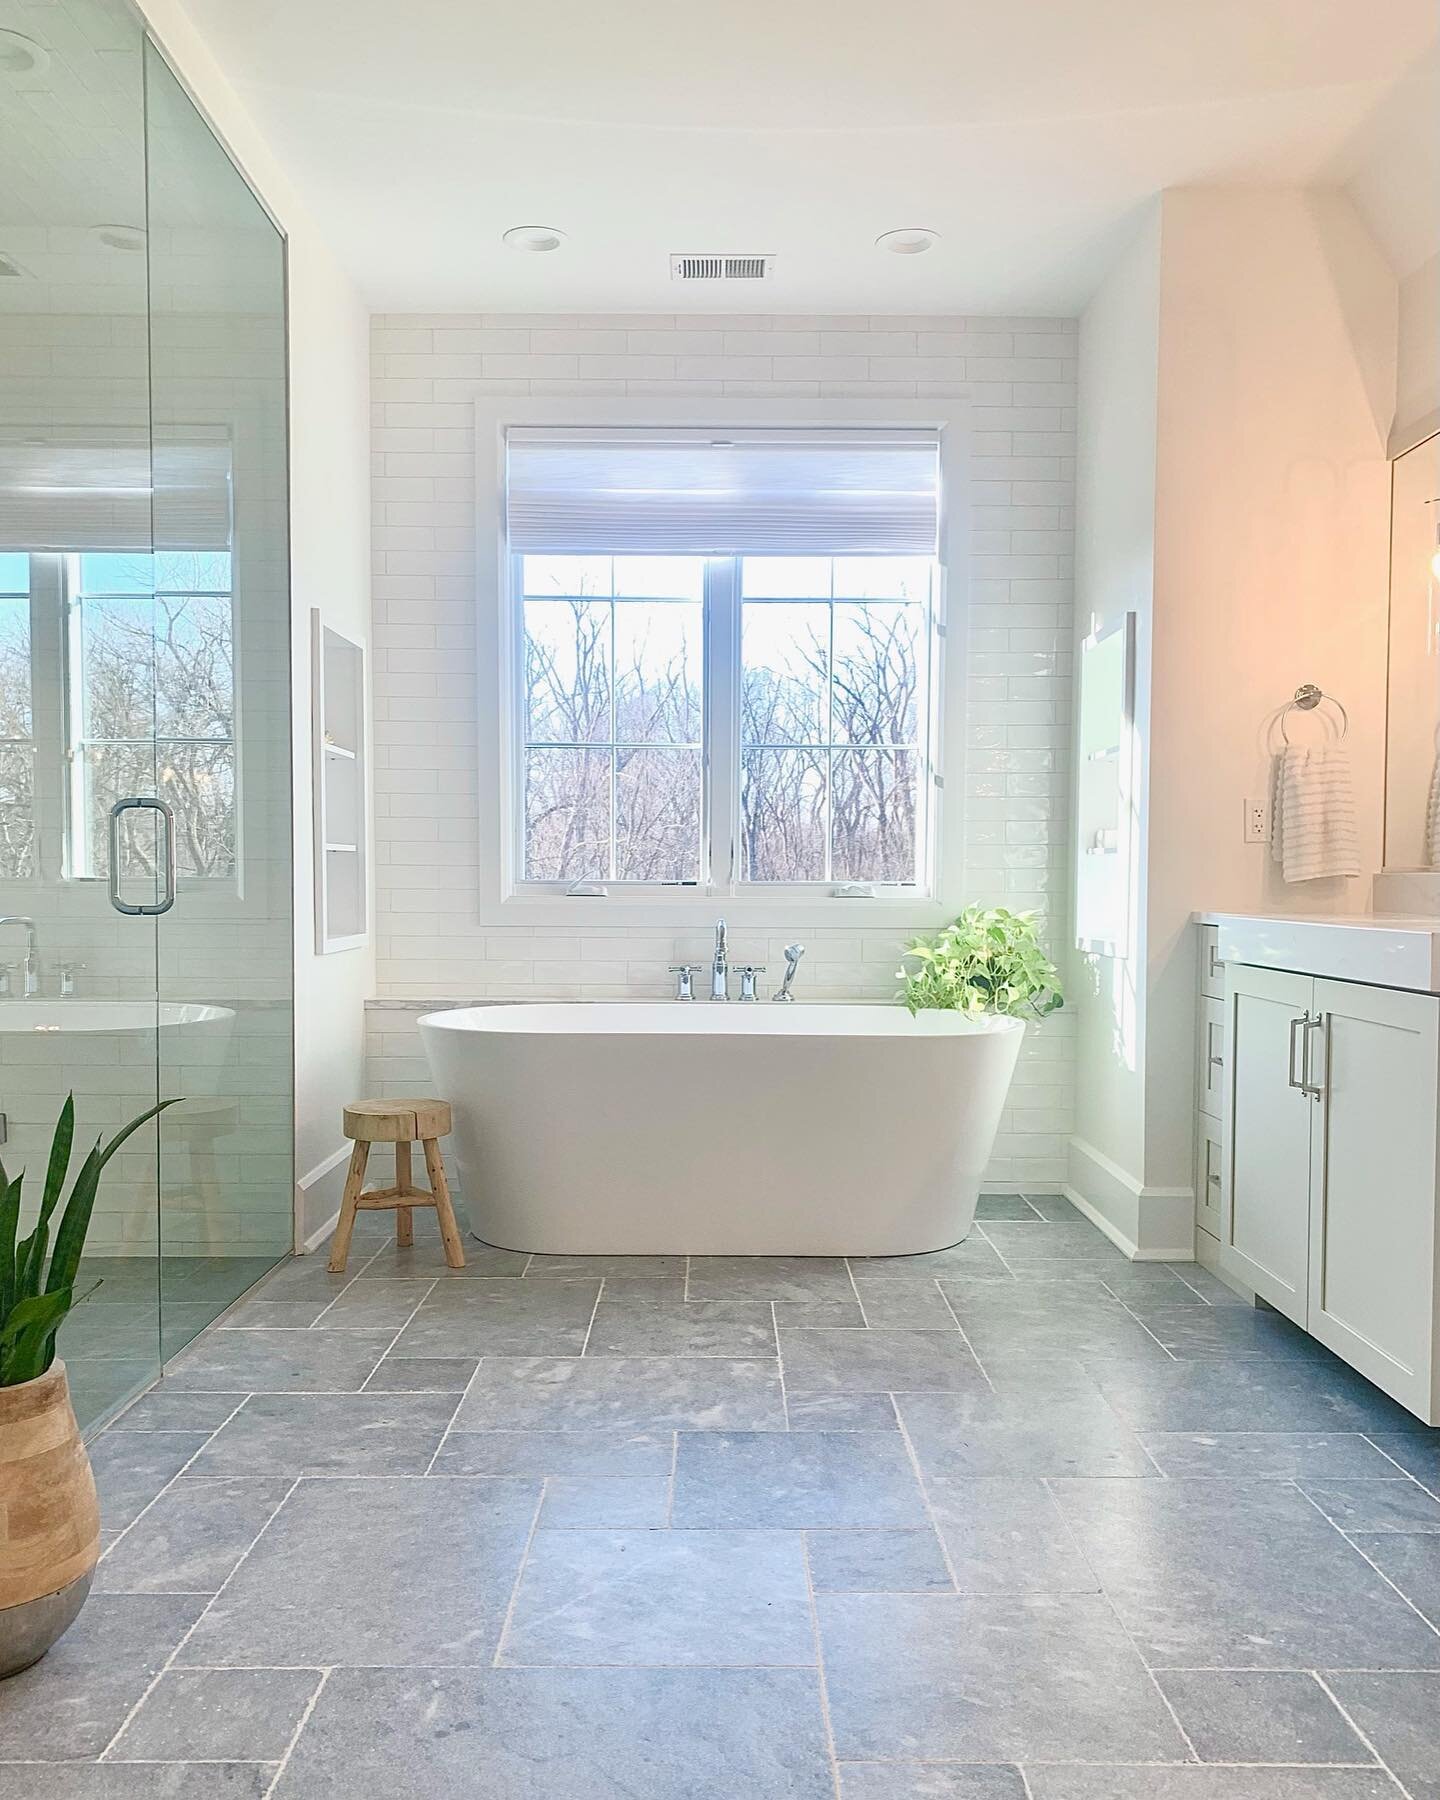 With a view overlooking the woods, I wanted to make sure the feeling outside was reflected inside this bathroom. This natural stone tile definitely sets the tone and grounds the space. 
#livinontheedgewood 

🔨: @greenside_design_build 
💫: @artesian